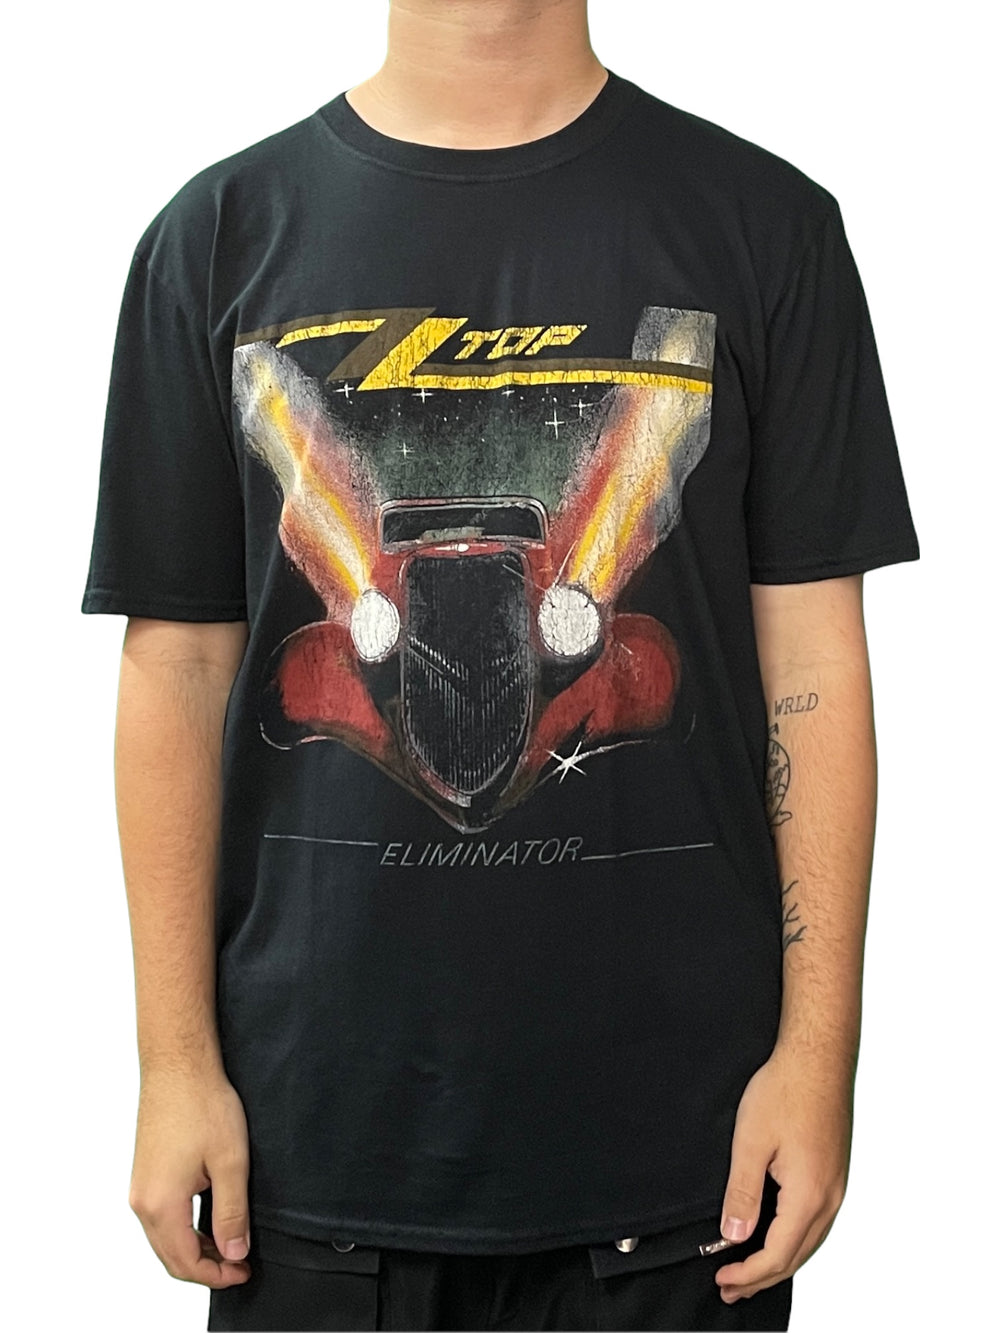 ZZ Top Eliminator Distressed Official Unisex T Shirt Brand New Various Sizes